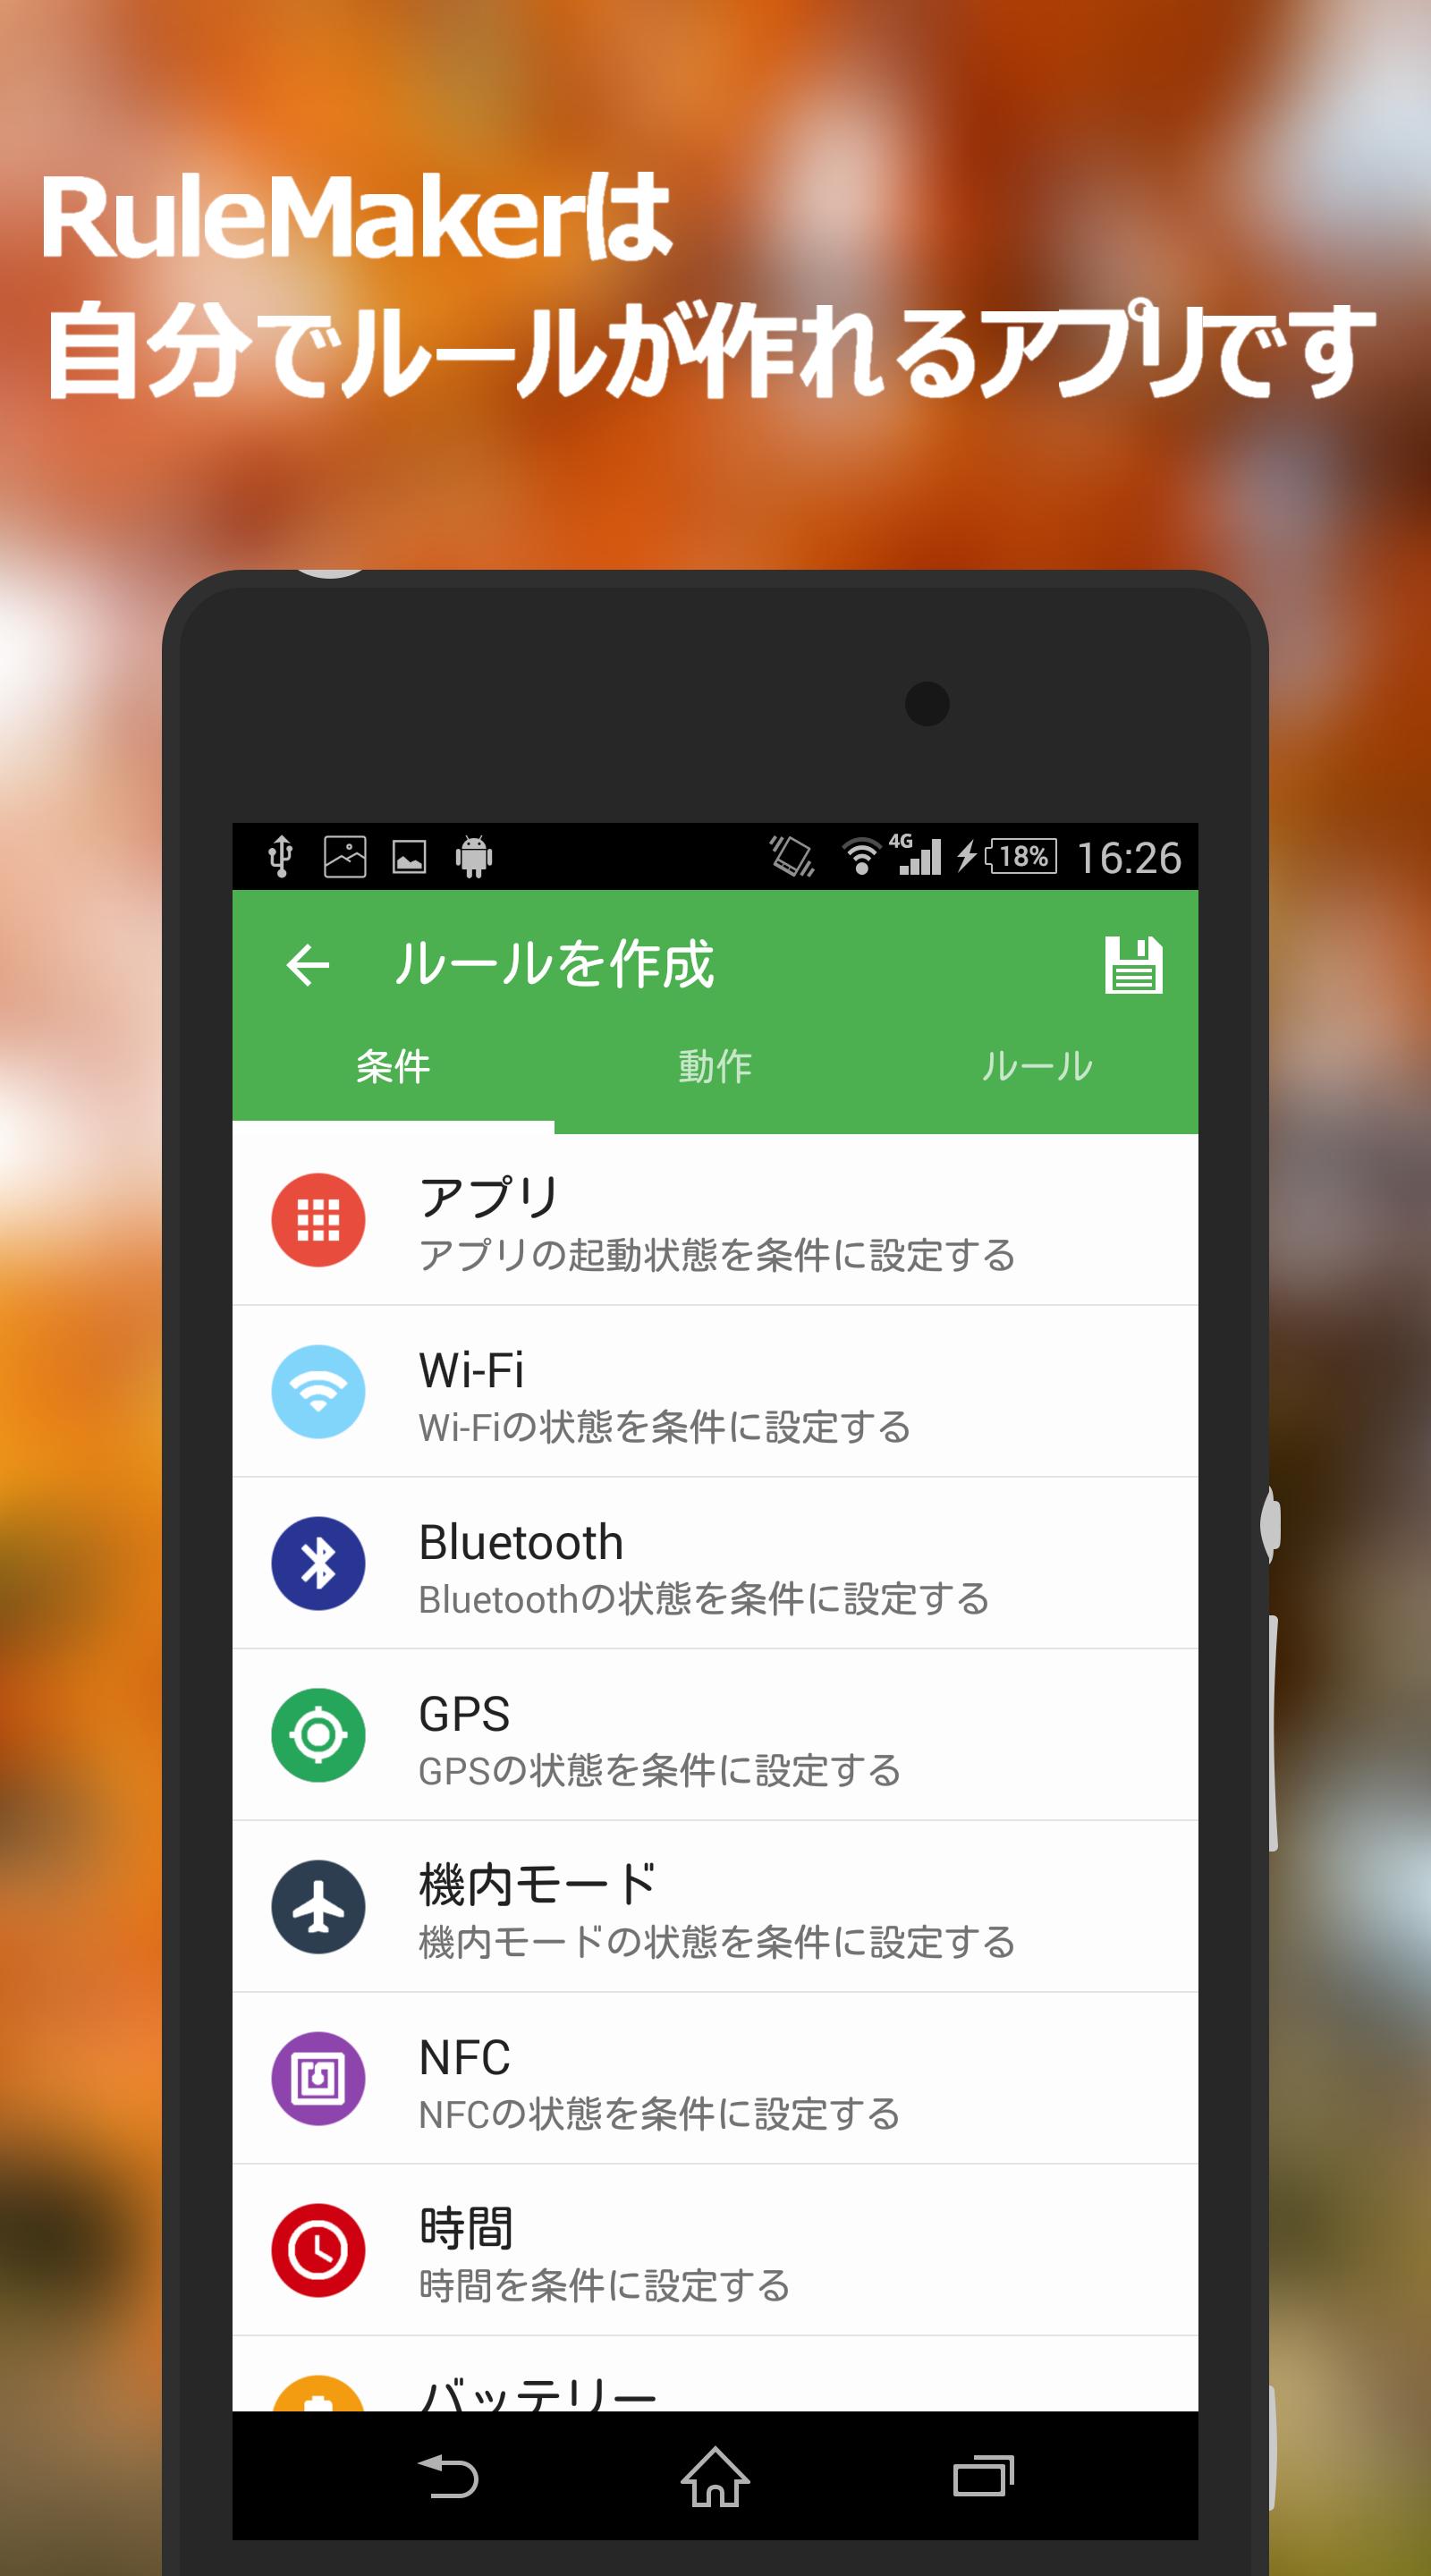 Rulemaker あなたのスマホを便利にするアプリ For Android Apk Download